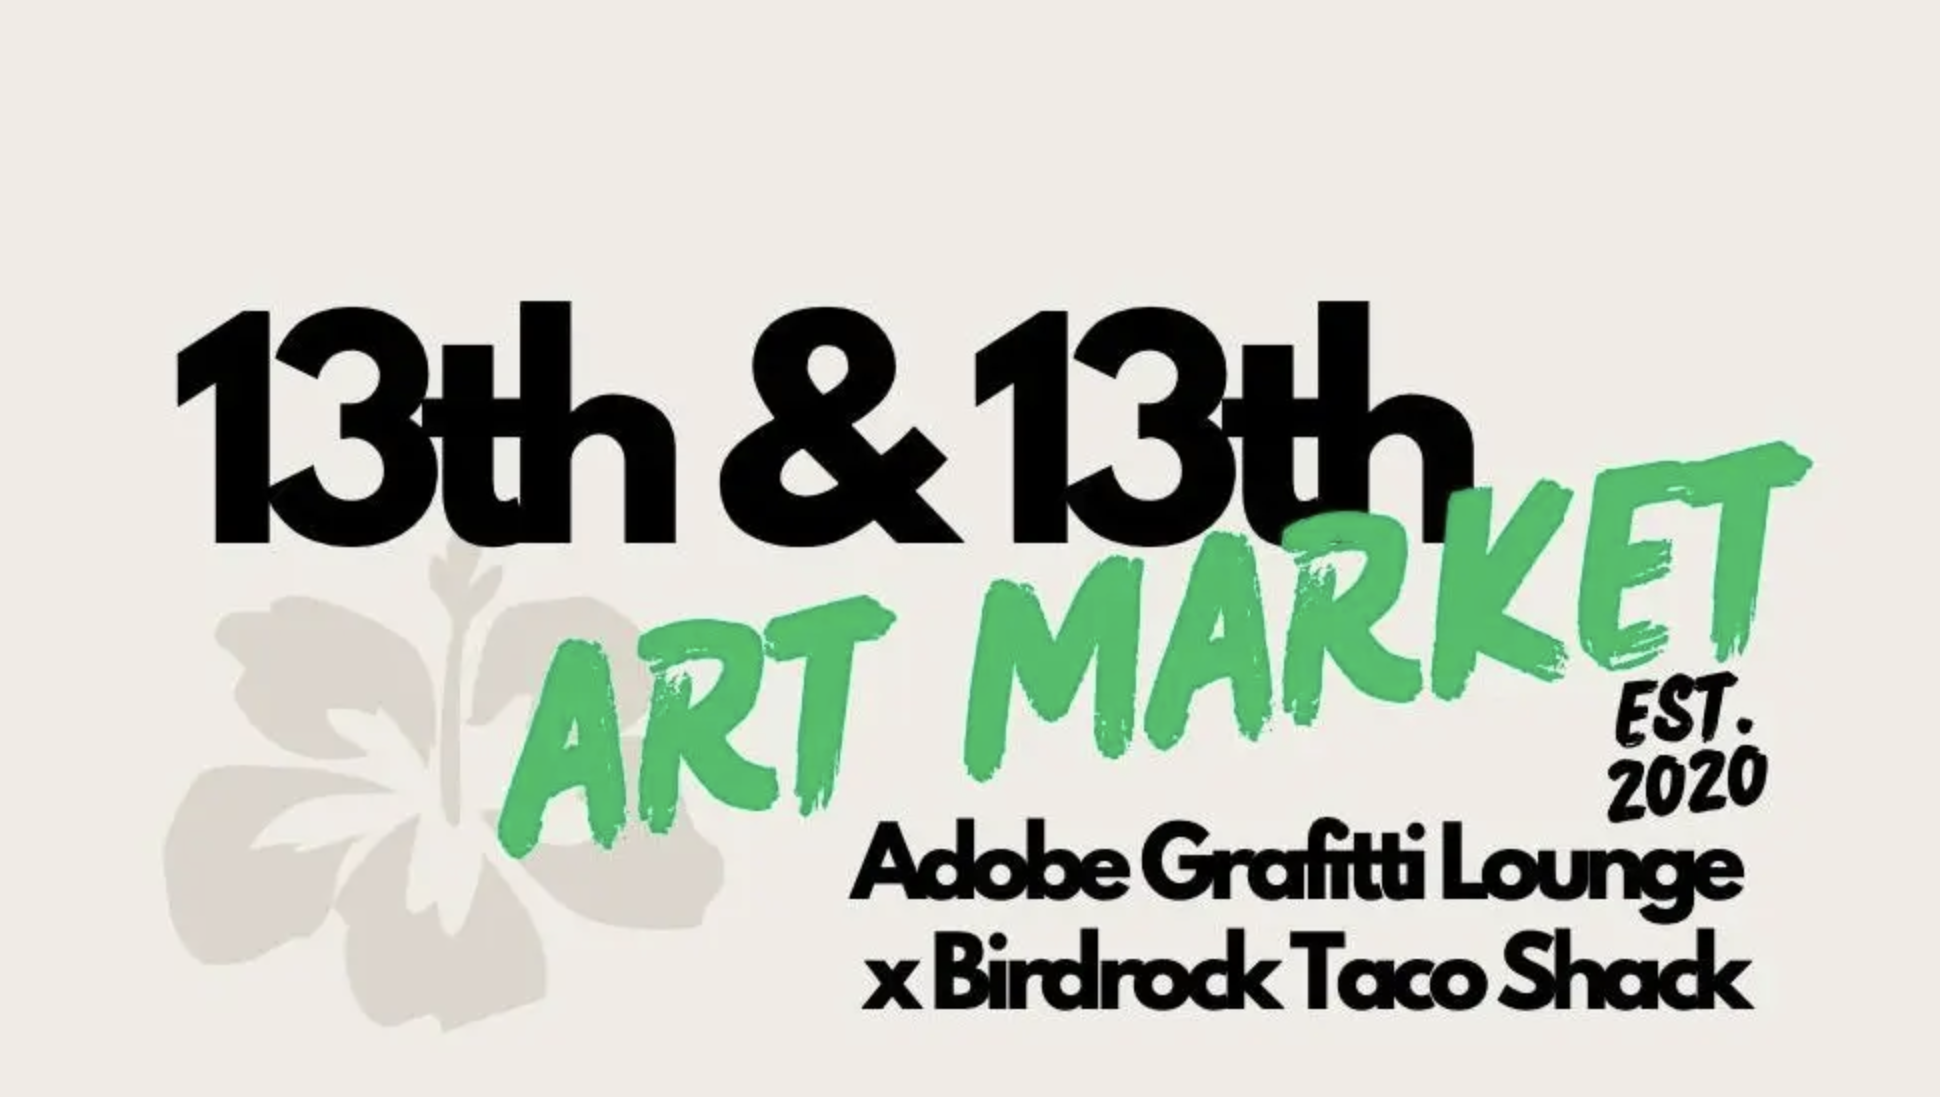 13th & 13th art market logo and graphic